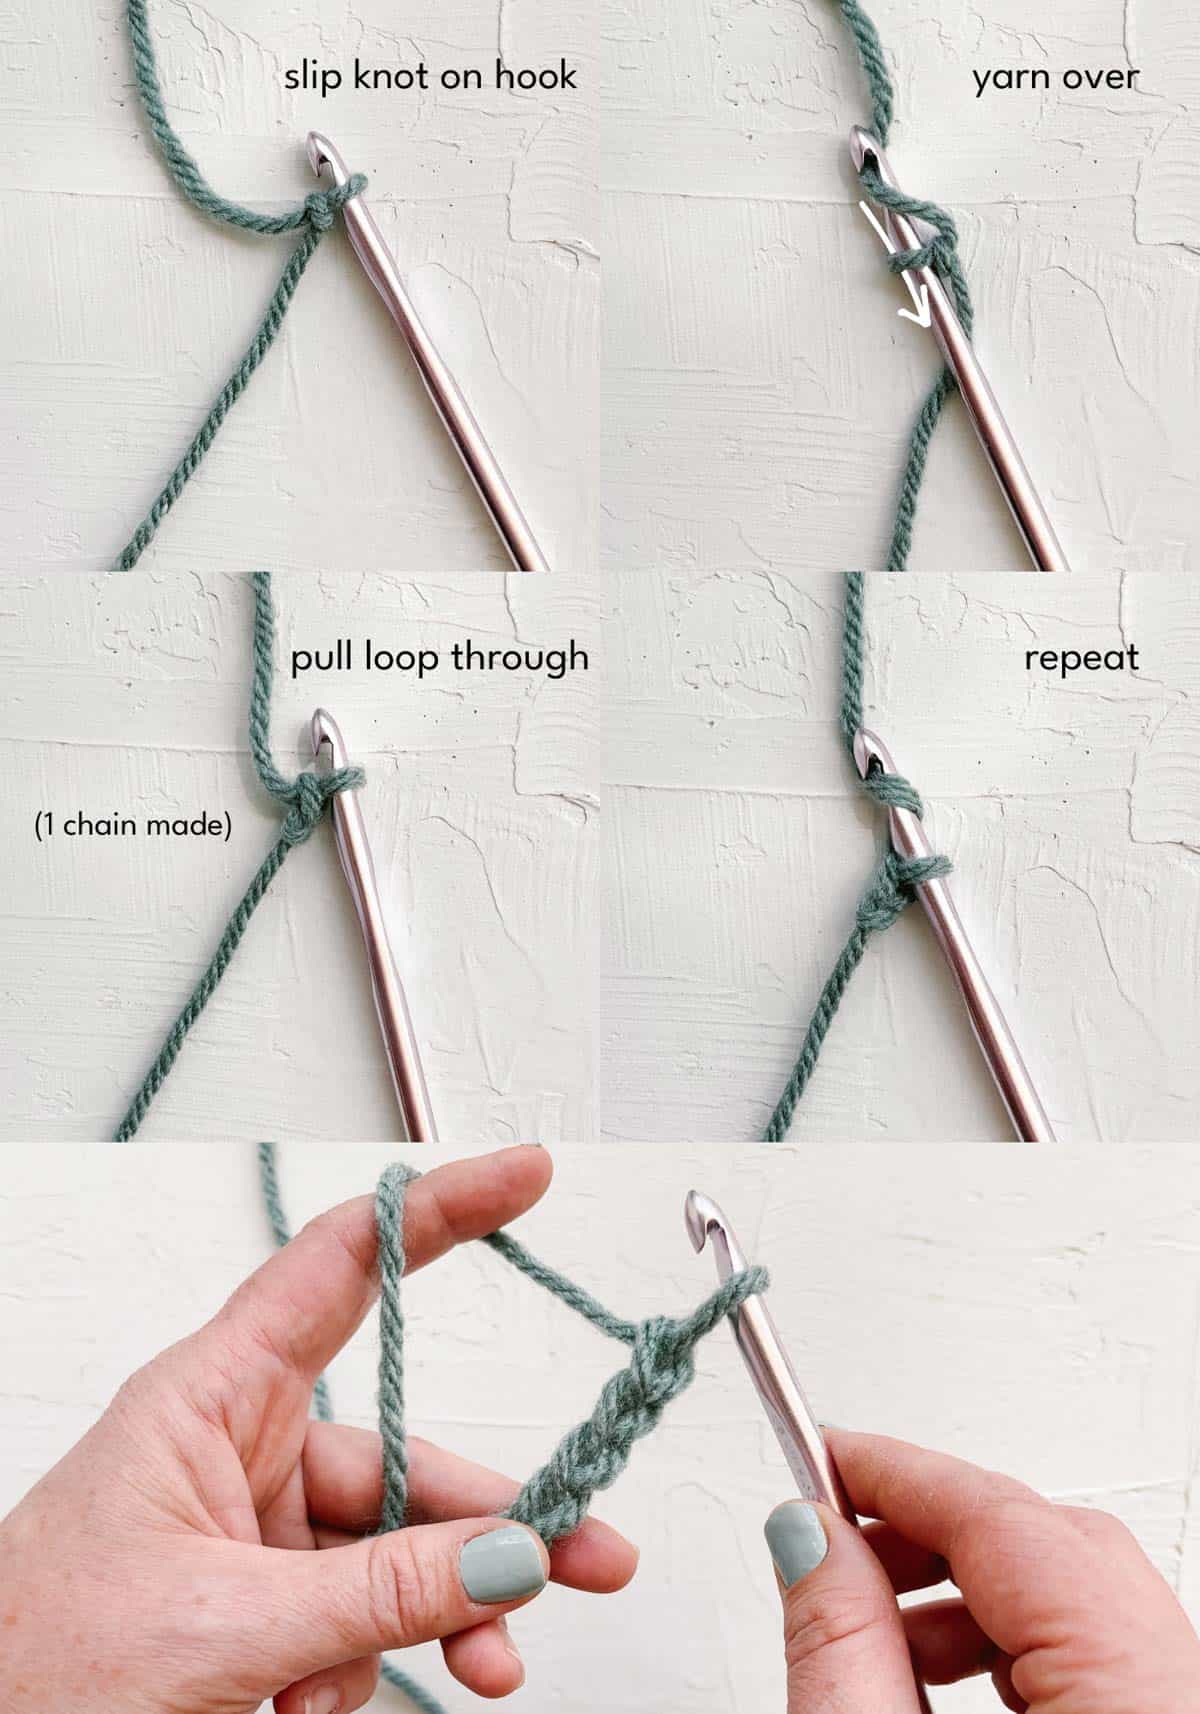 How to make a crochet chain step by step tutorial.